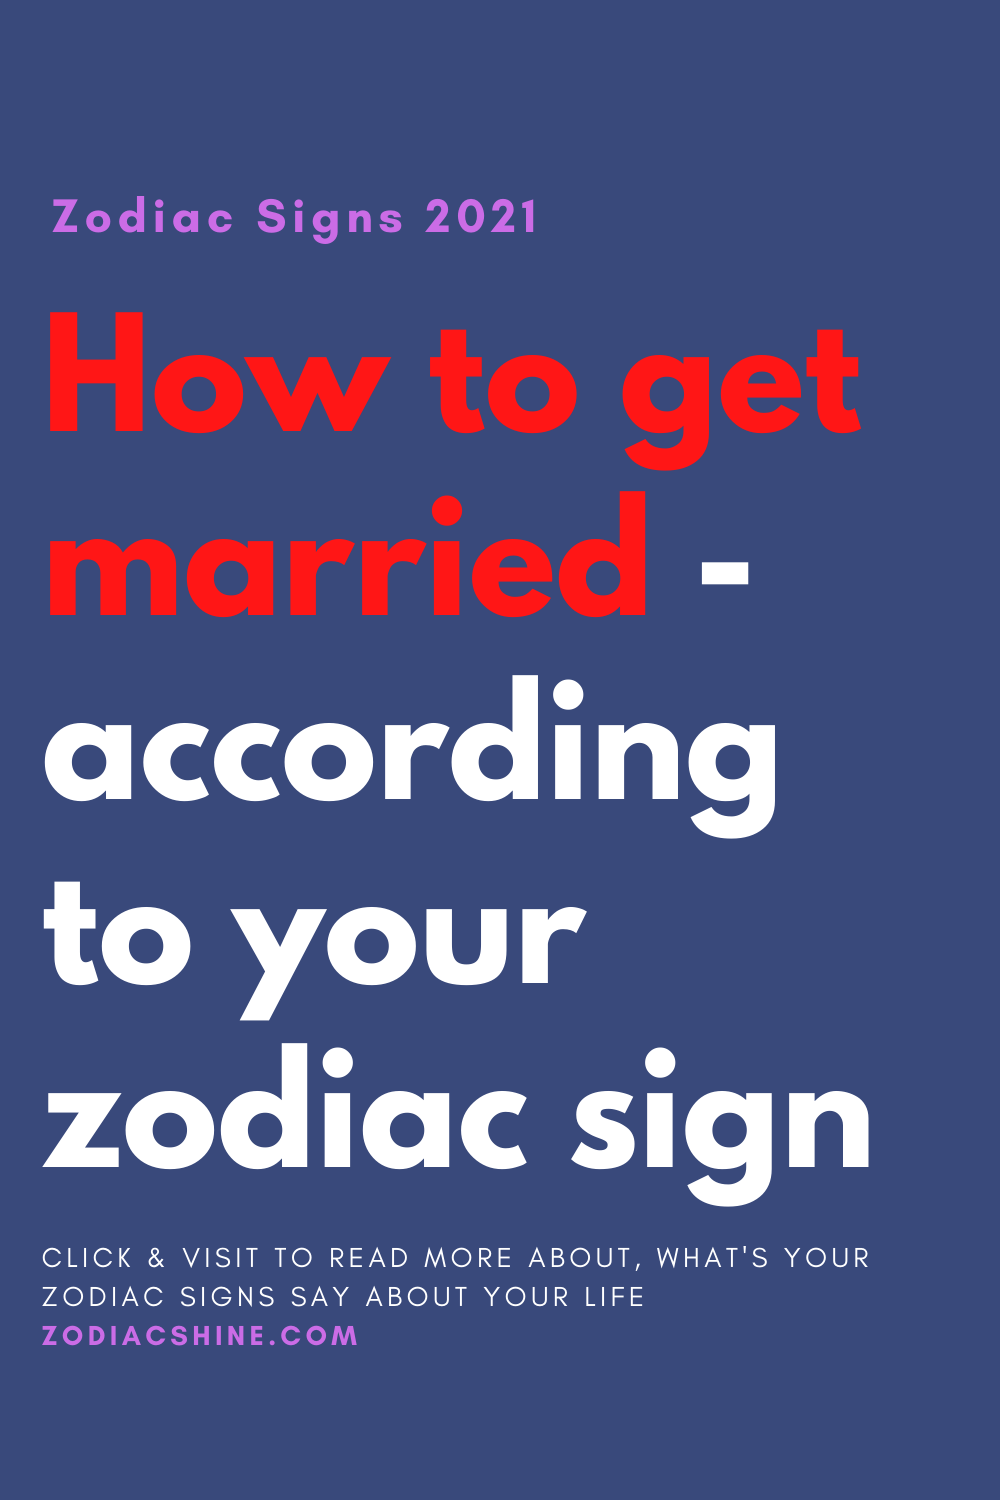 How to get married - according to your zodiac sign